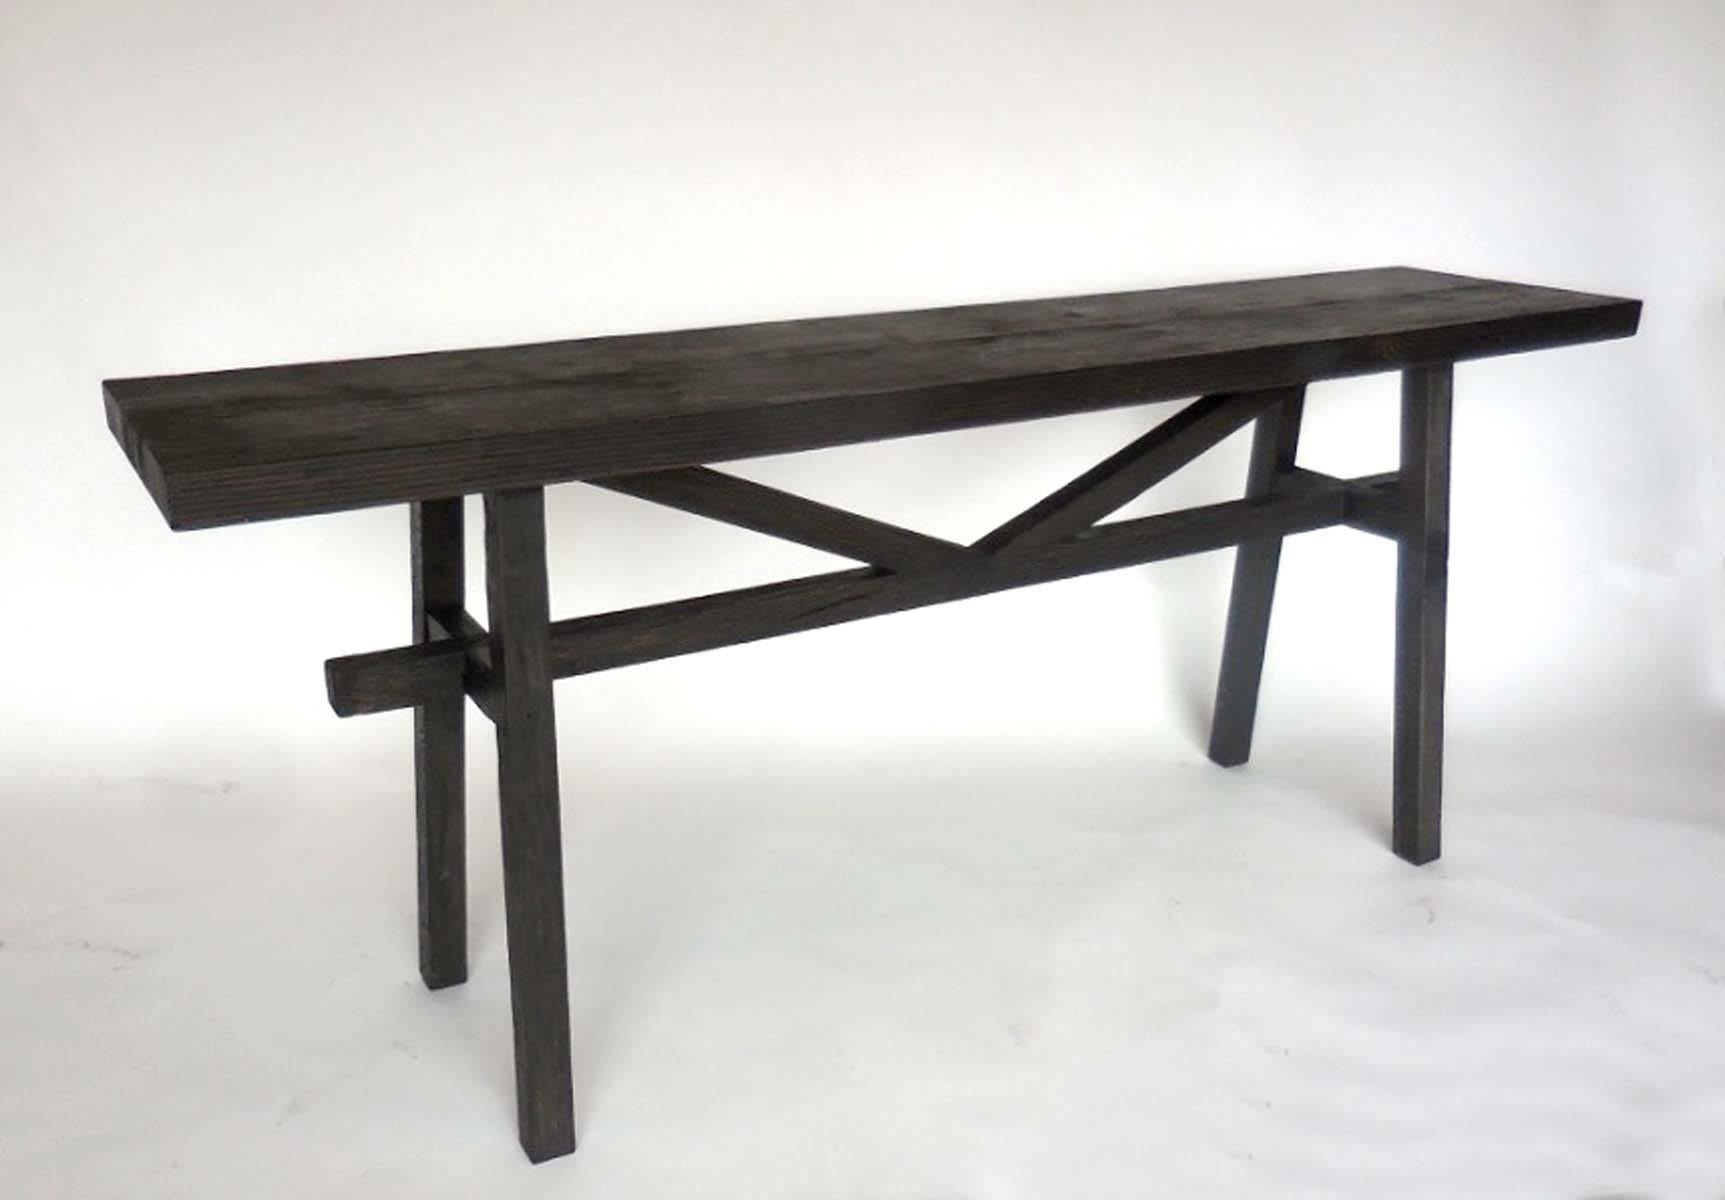 Custom douglas fir wood console, available off the floor. Can also be made in custom sizes and finishes. As shown here, in Epresso. Made in Los Angeles by Dos Gallos Studio.
PRICES ARE SUBJECT TO CHANGE. PLEASE INQUIRE BEFORE PLACING AN ORDER.